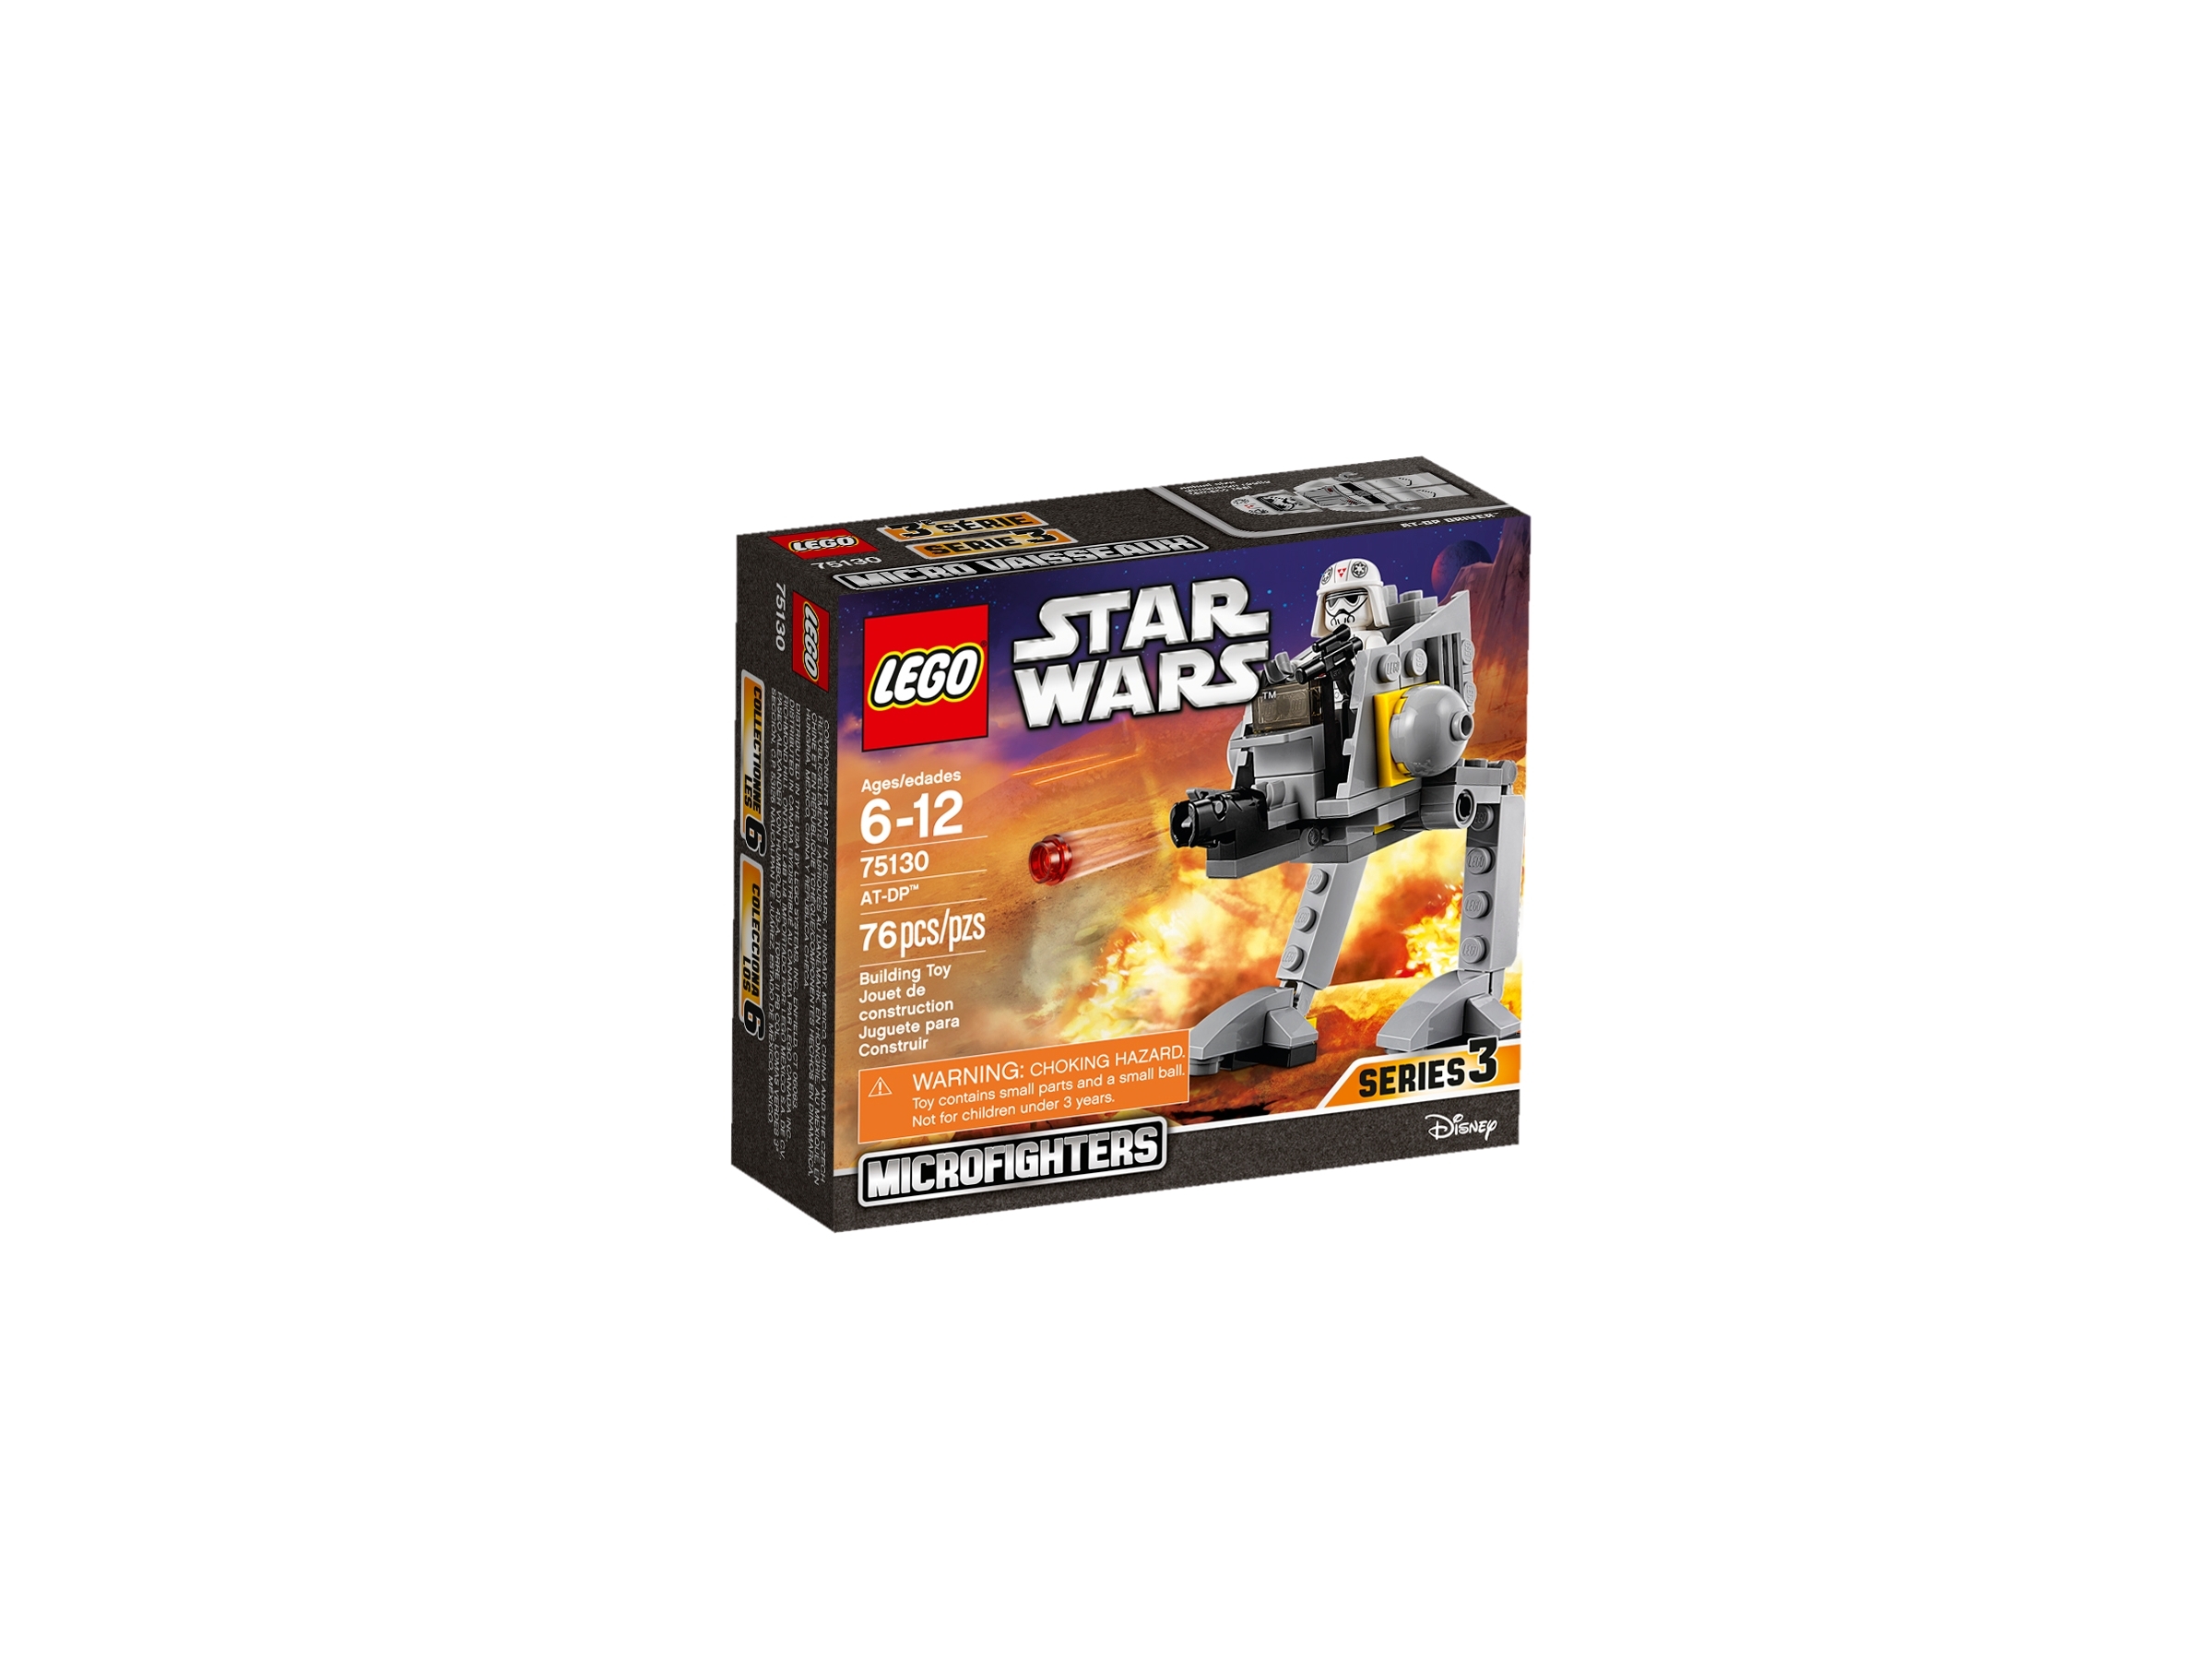 LEGO Star Wars 75130 AT-DP Walker and Driver Microfighters Serie 3 